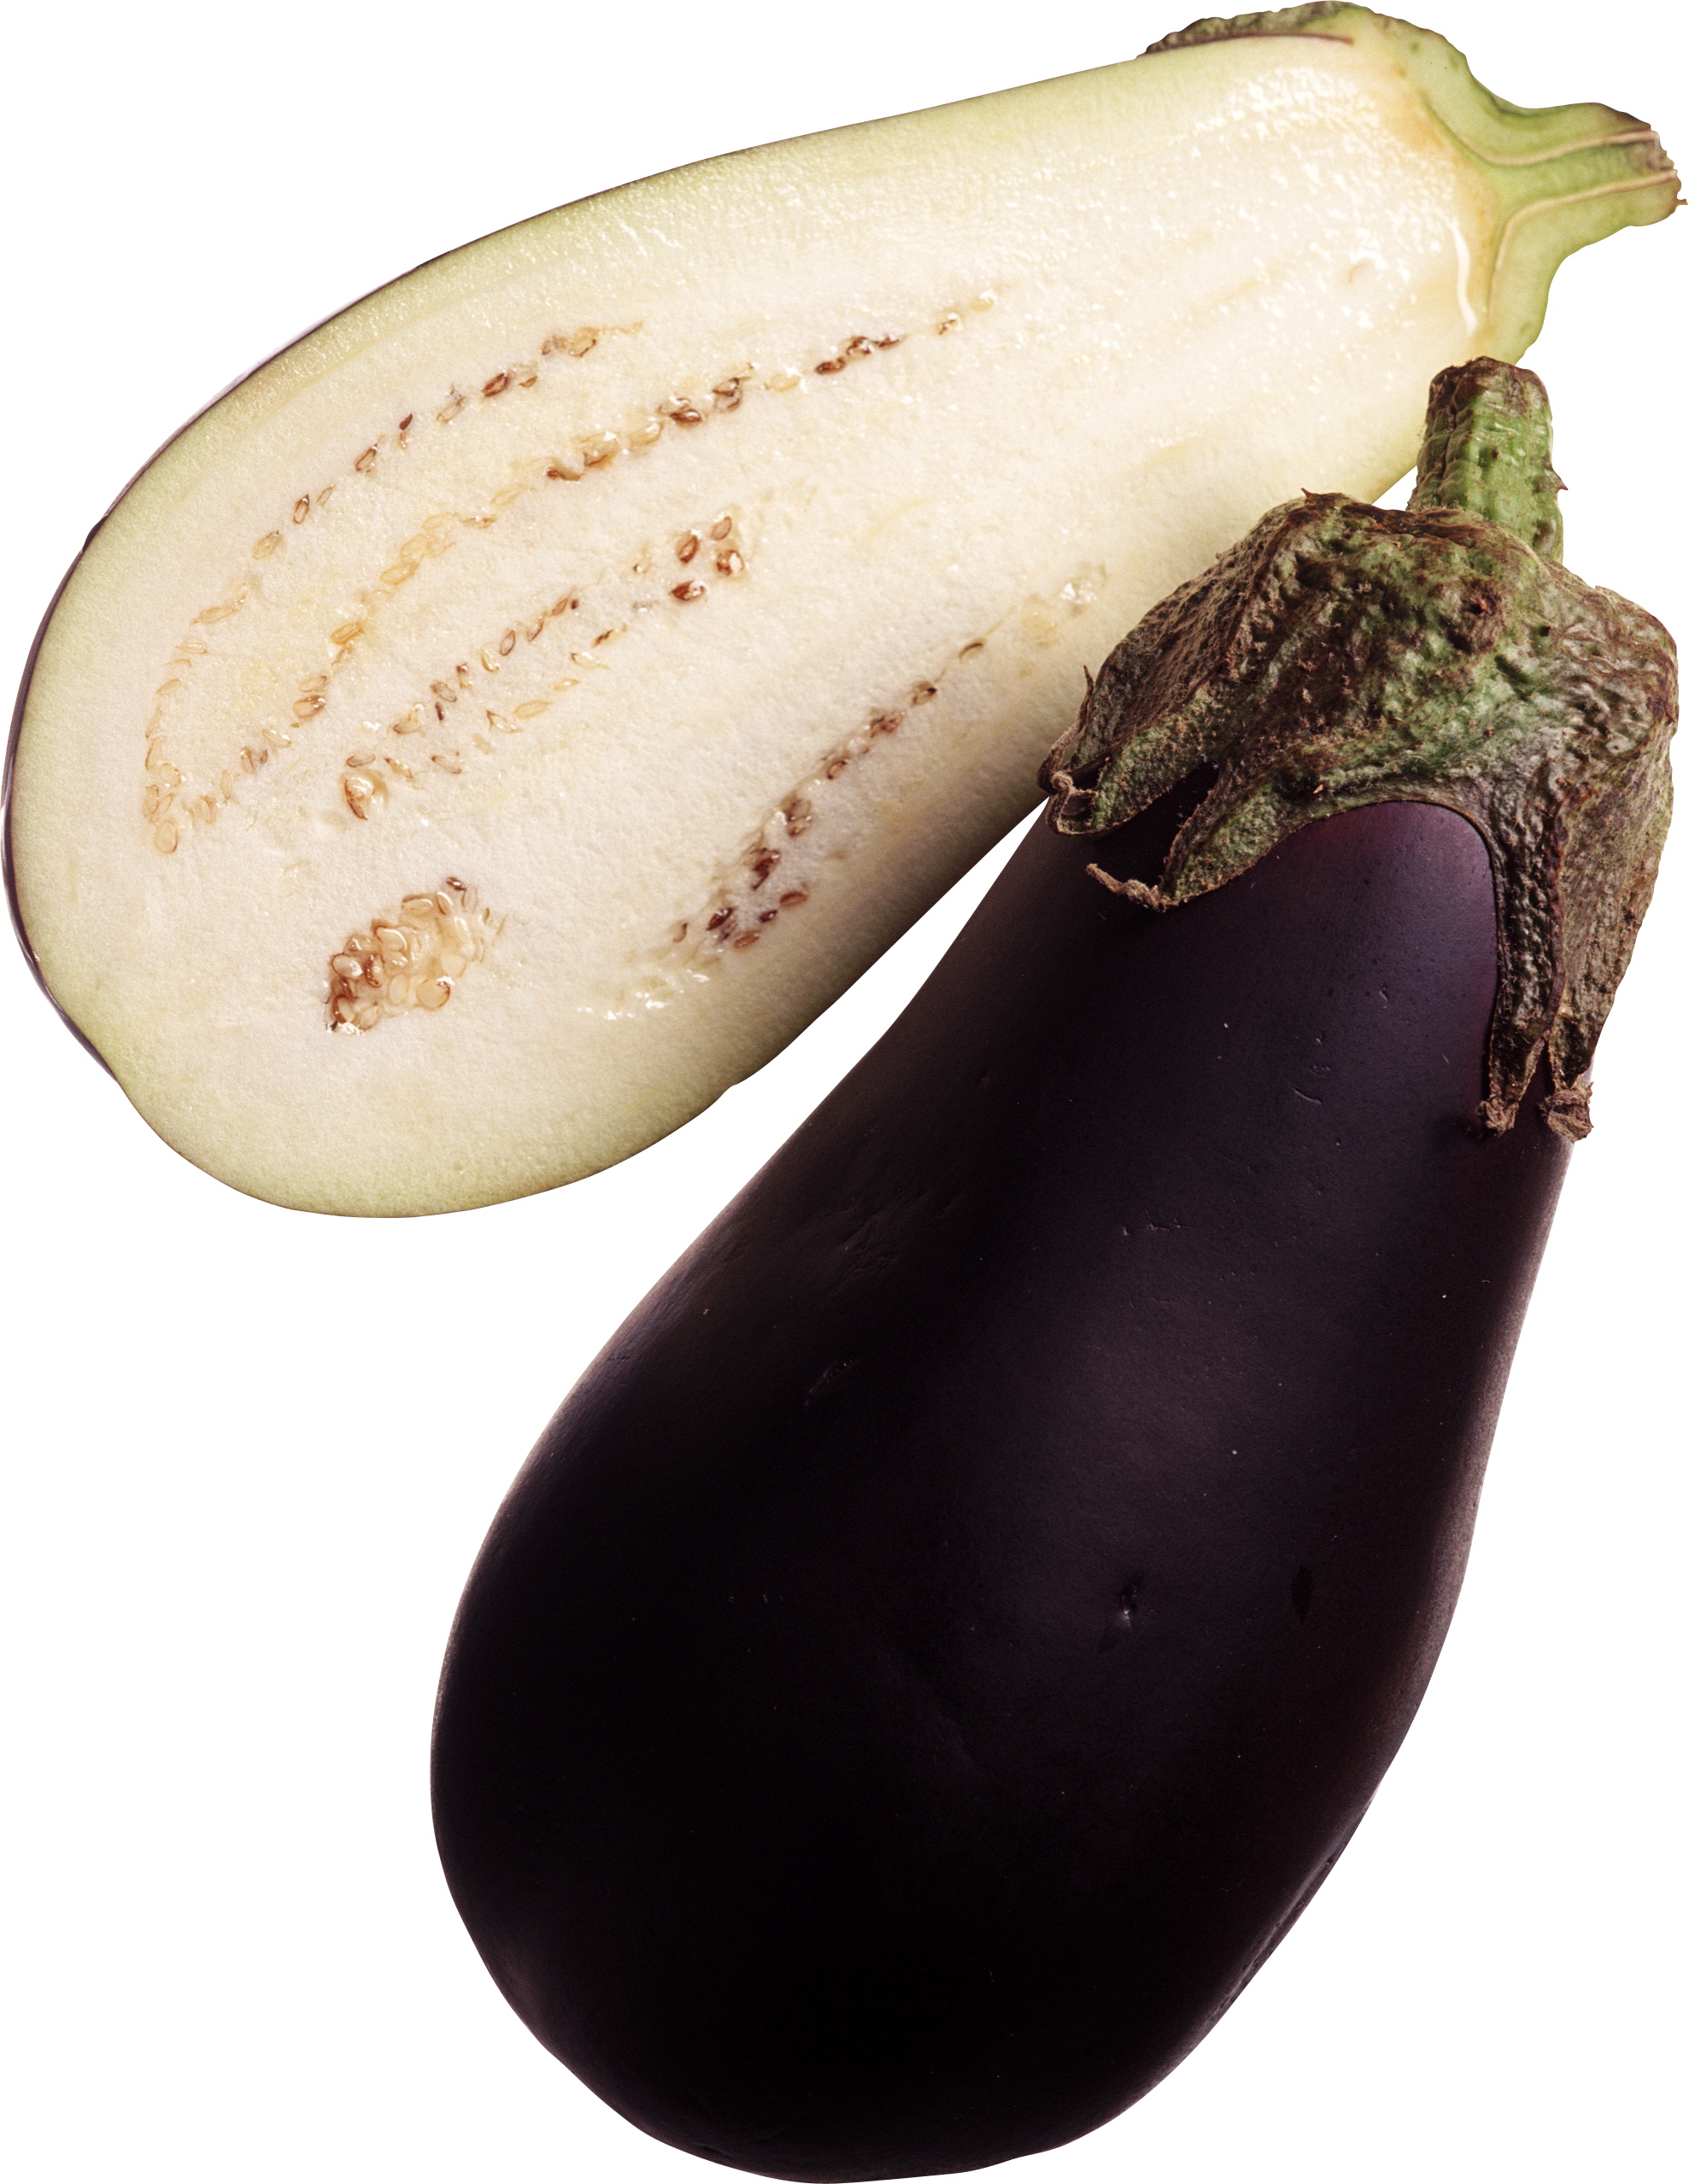 A Eggplant And A Half Of A Vegetable